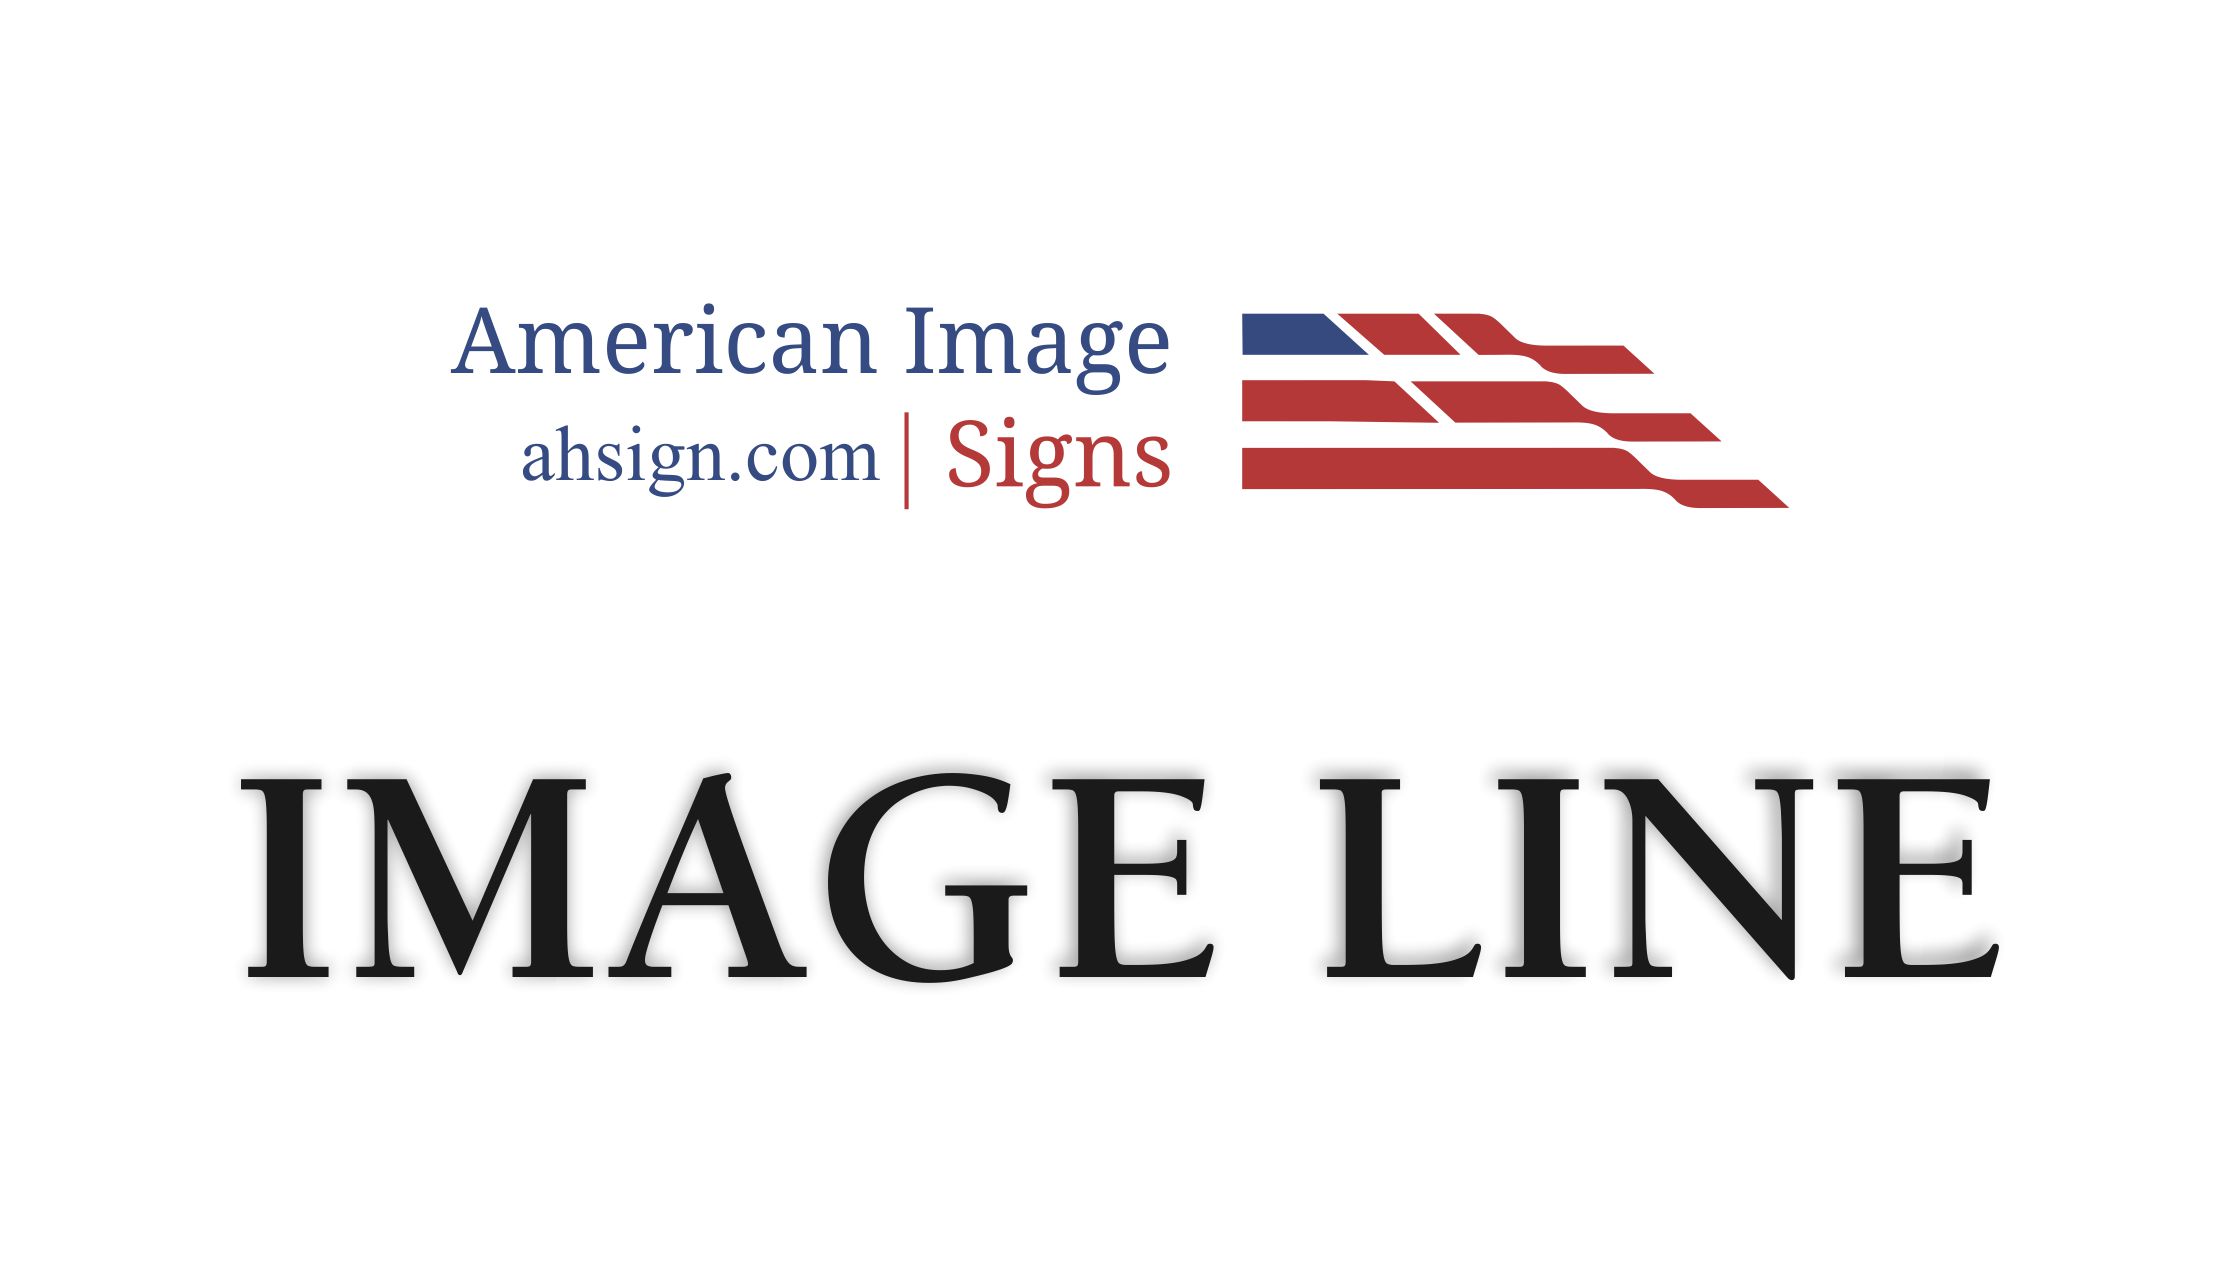 ImageLine Signs